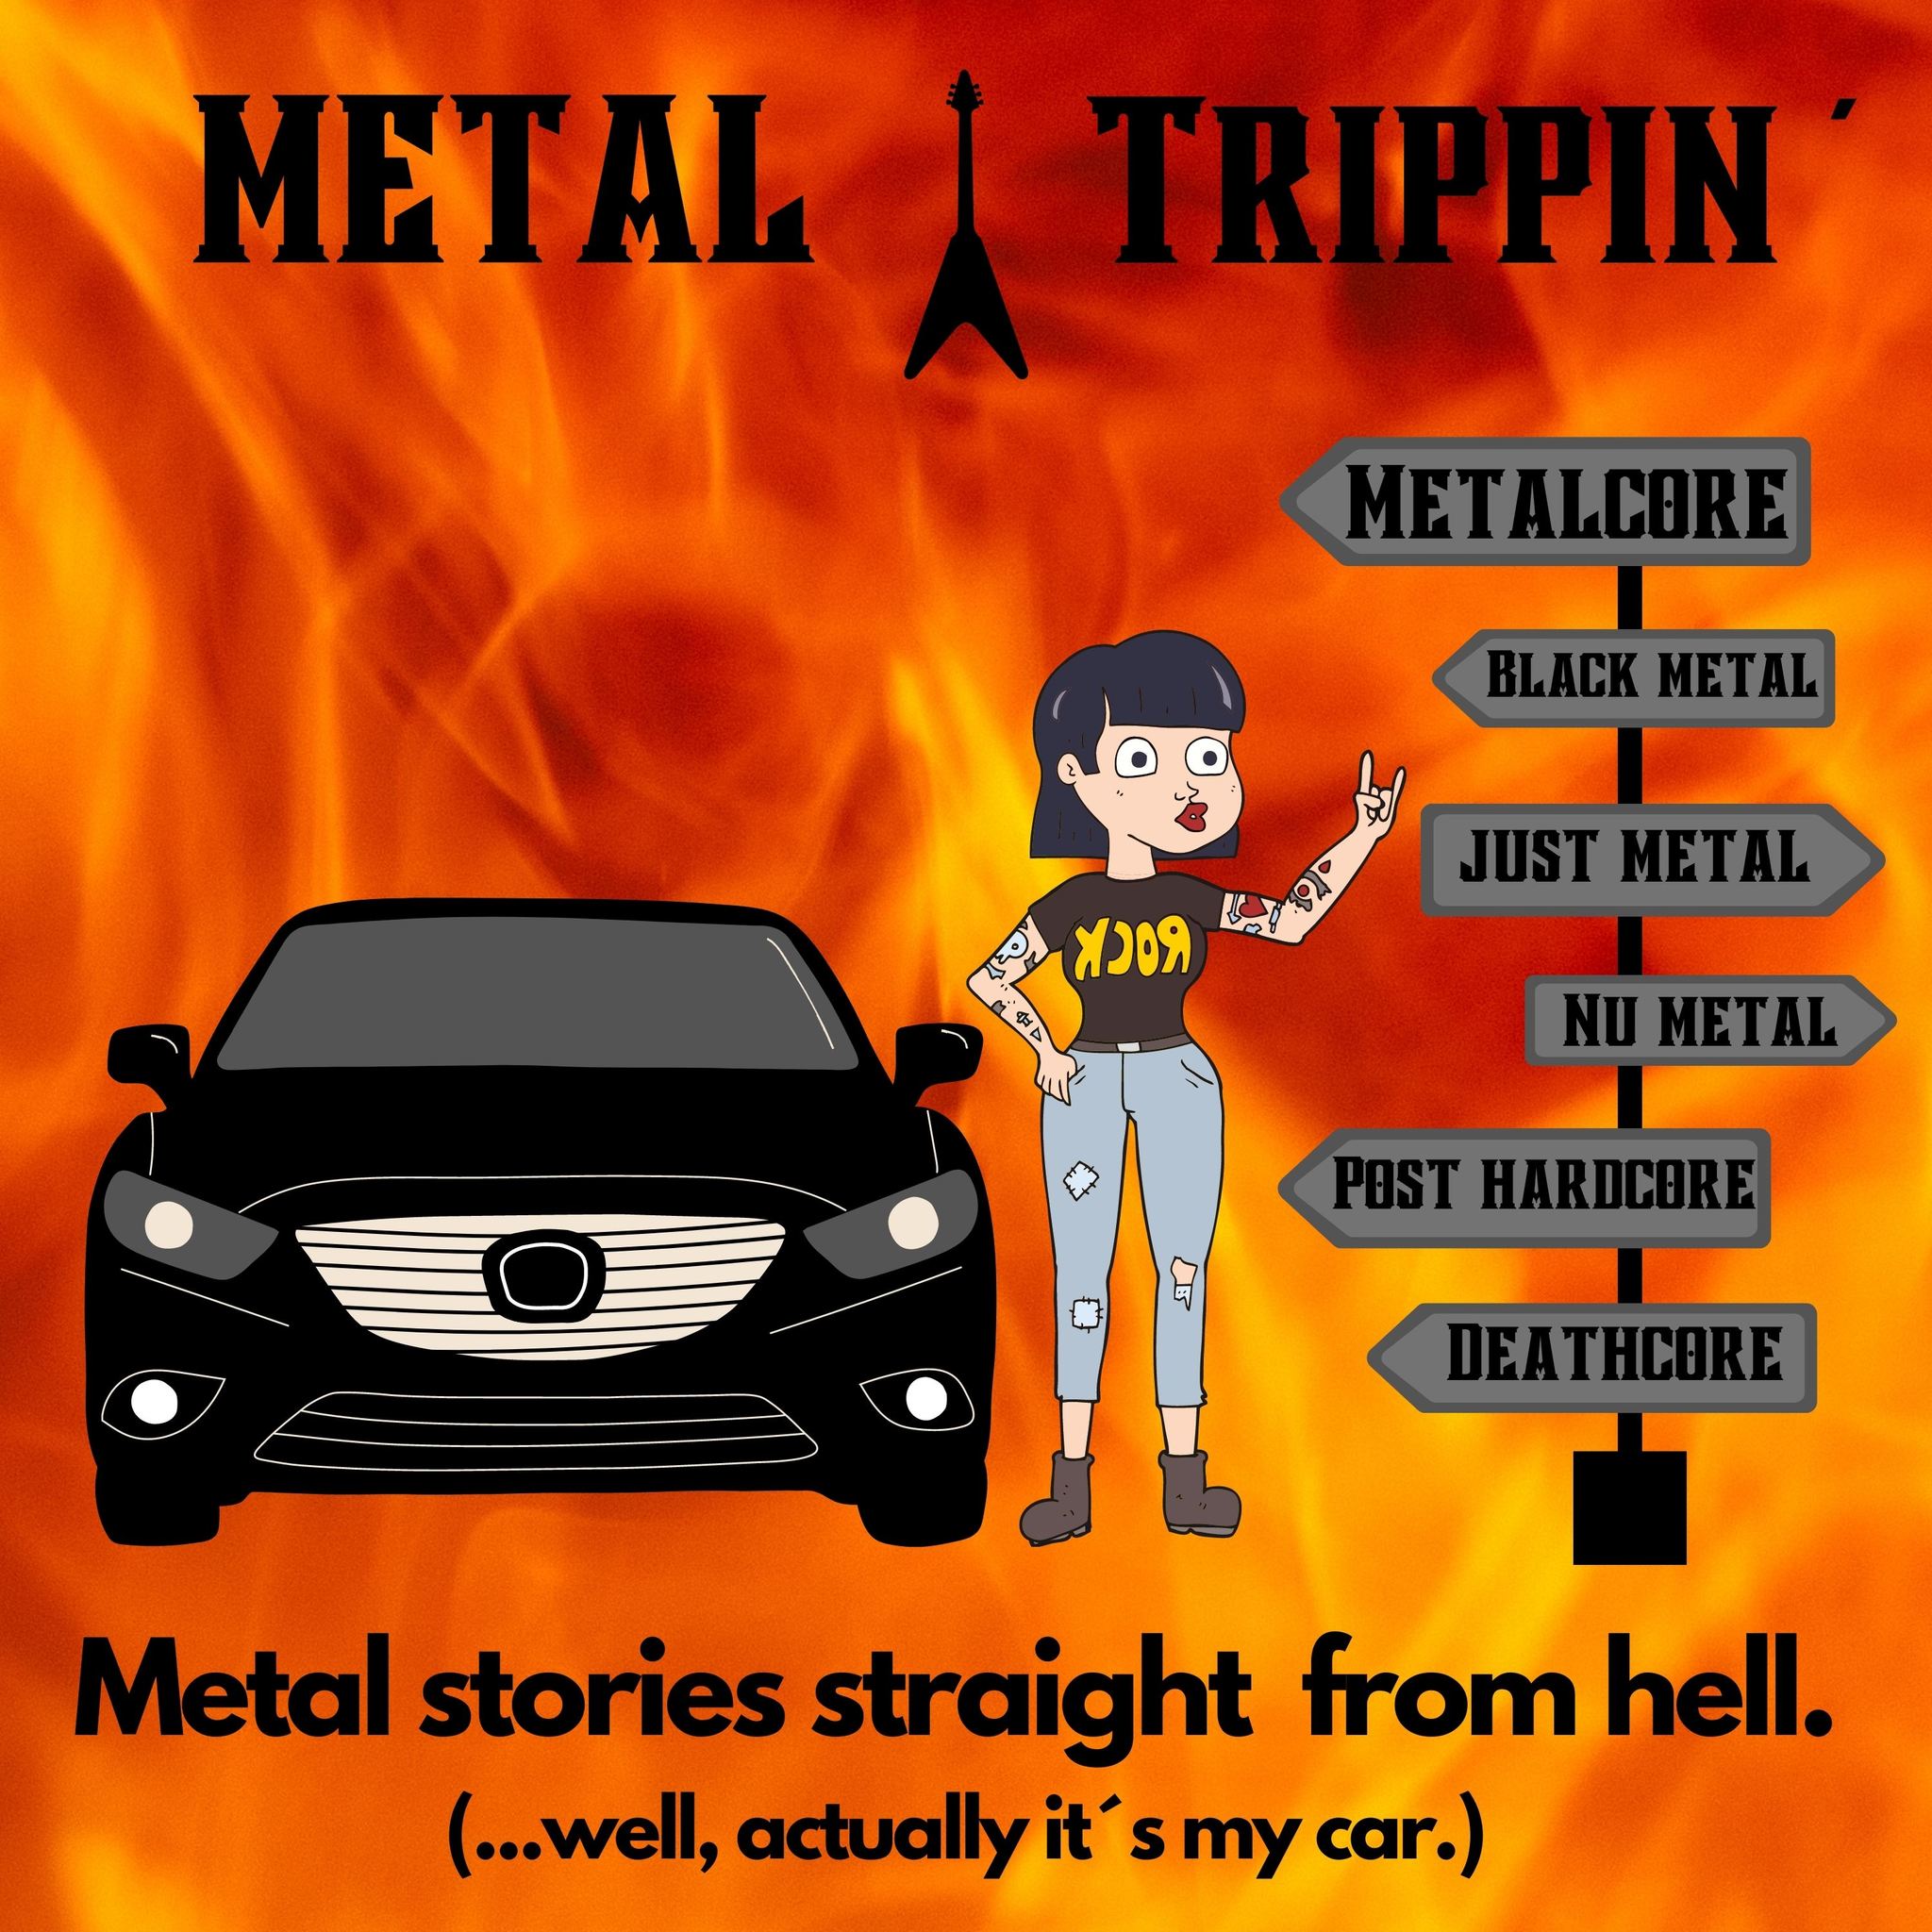 METAL TRIPPIN- Metal stories straight from hell (...well, actually its my car)